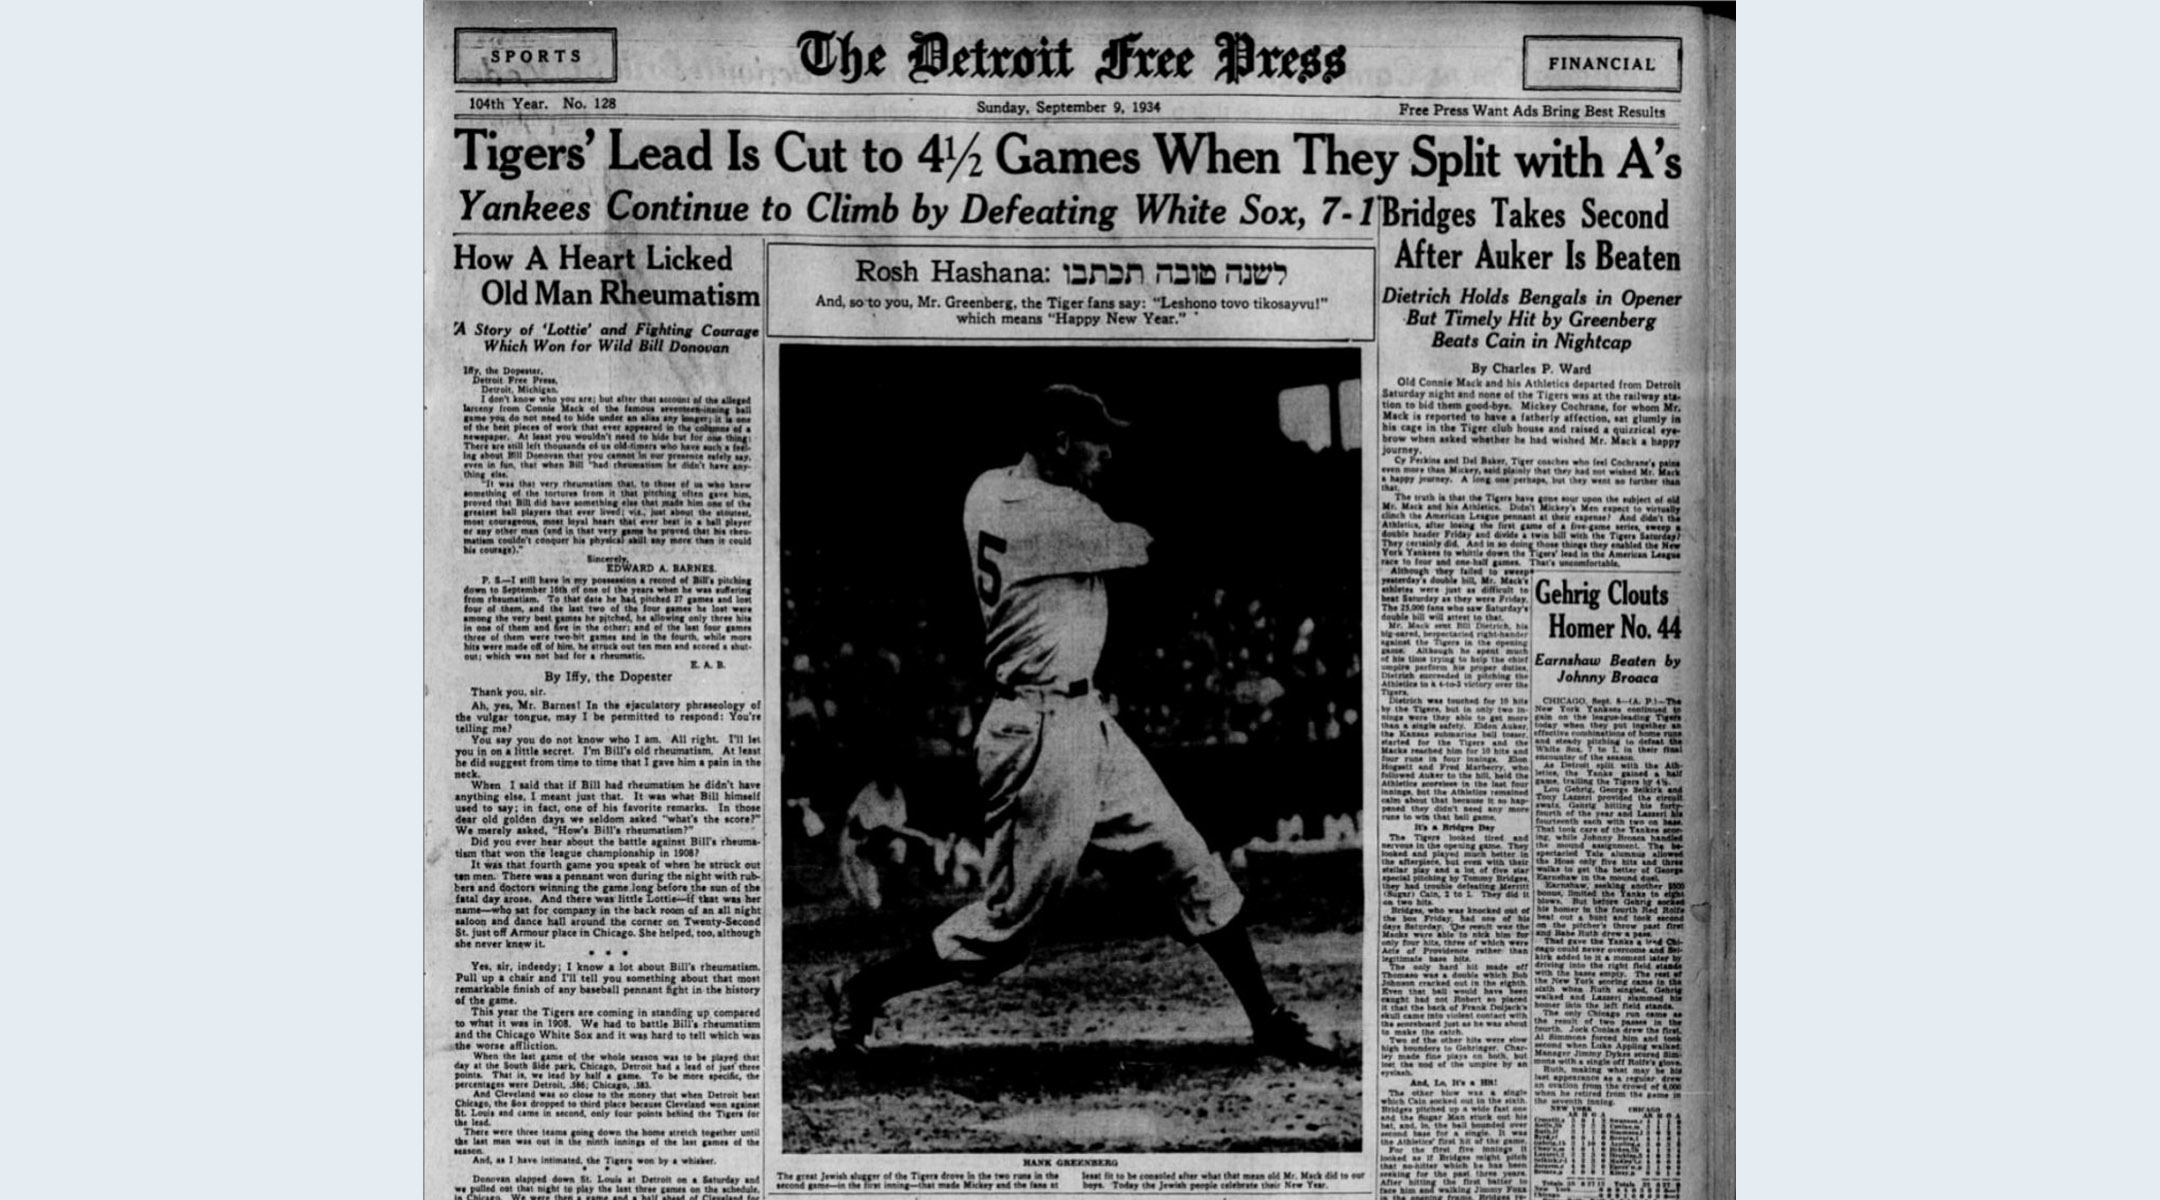 The front page of the Detroit Free Press sports section on Sept. 9, 1934. (Screenshot)